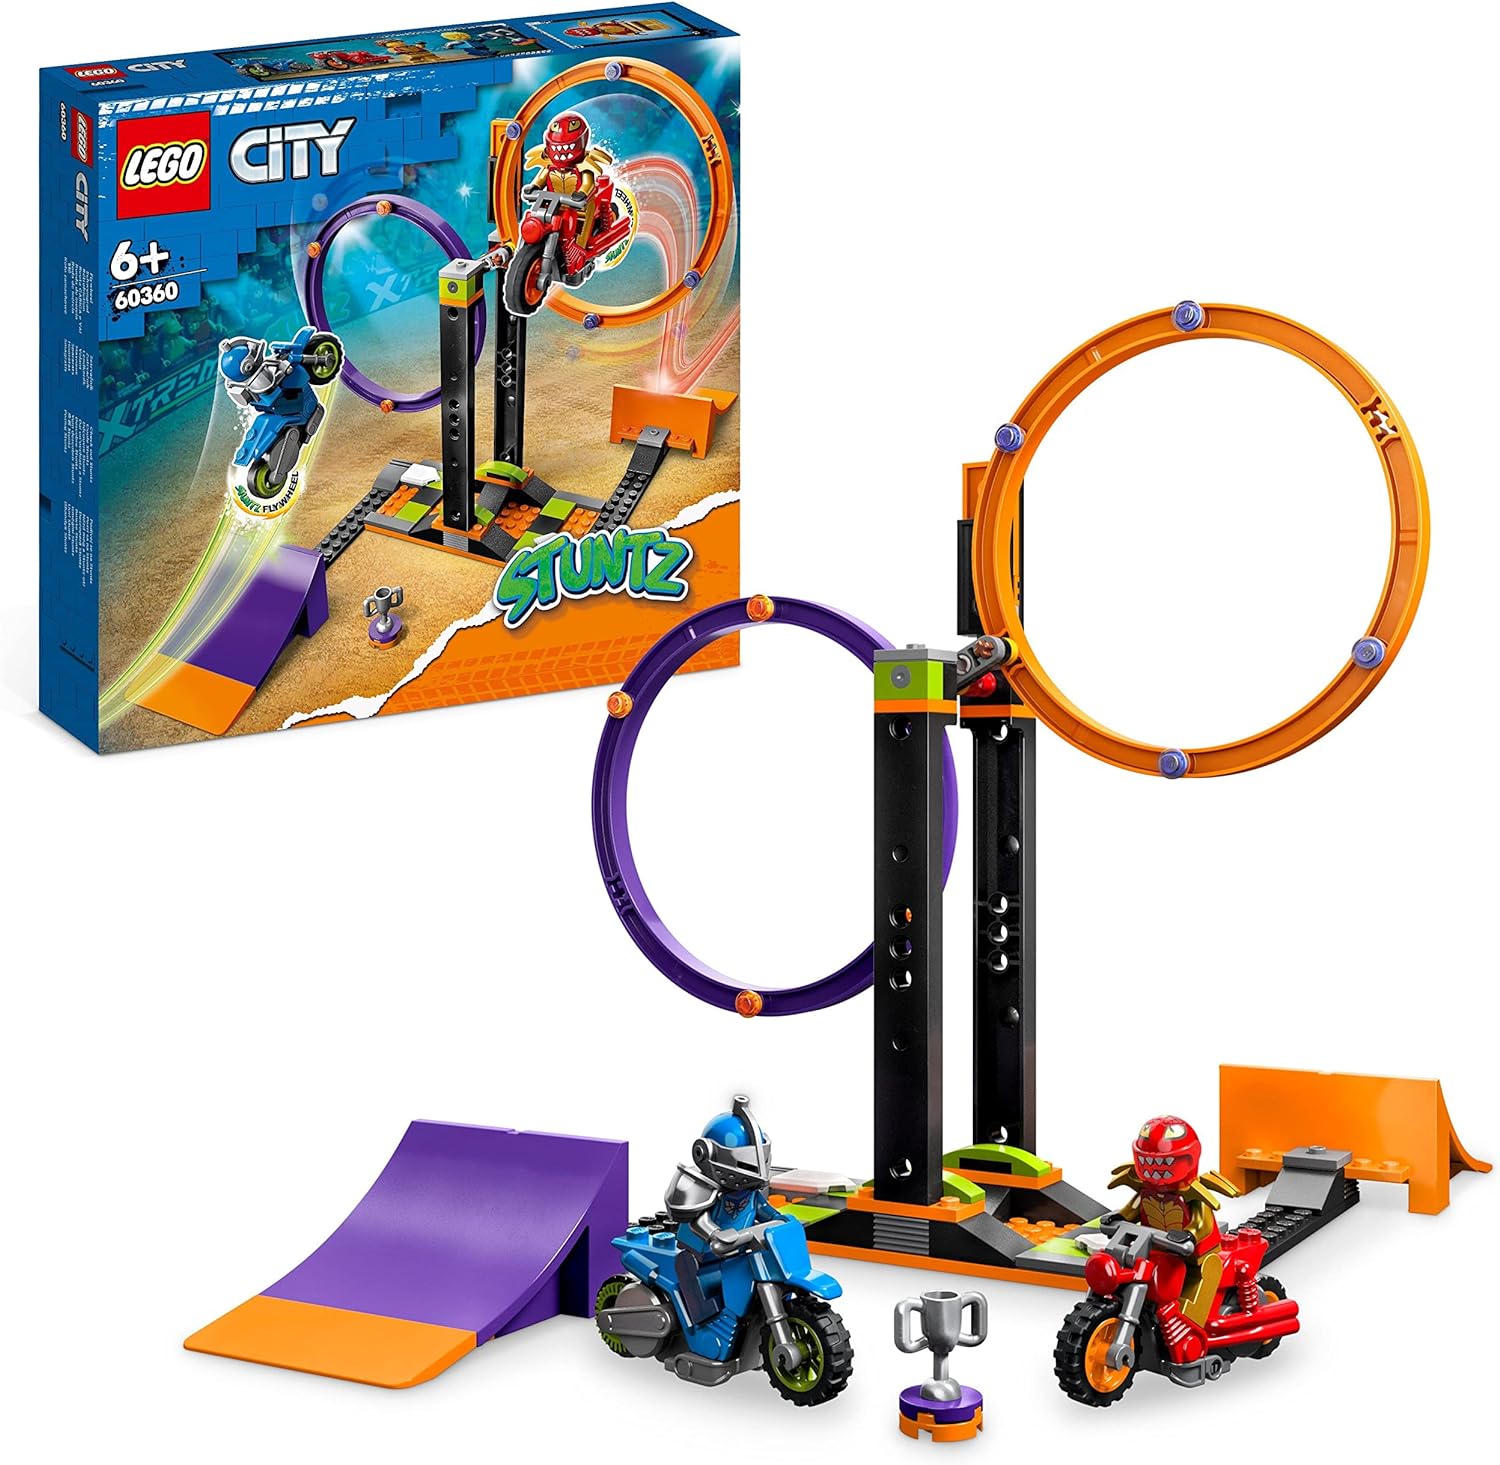 LEGO 60360 City Stuntz Spinning Stunt Challenge, 1 or 2 Player Contests with Flywheel-Powered Motorbike Toys for Kids, Boys & Girls 6 Plus years old, Fun Gift Idea